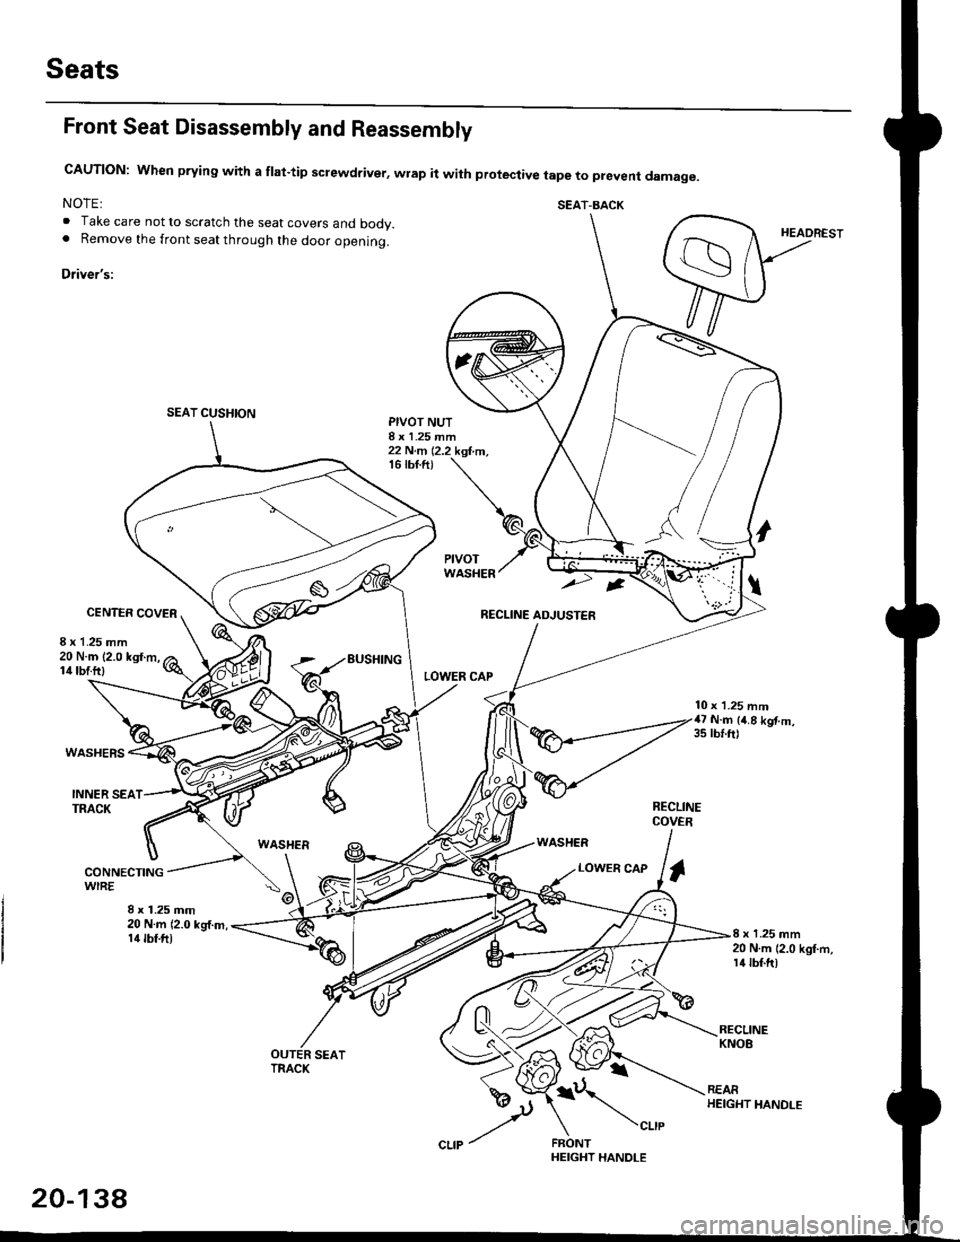 HONDA CIVIC 1996 6.G Workshop Manual Seats
Front Seat Disassembly and Reassembly
CAUTION: When prying with a flat-tip screwdriver, wrap it with protective tape to prevent damage.
NOTE: SEAT-BACK. Take care not to scratch the seat covers 